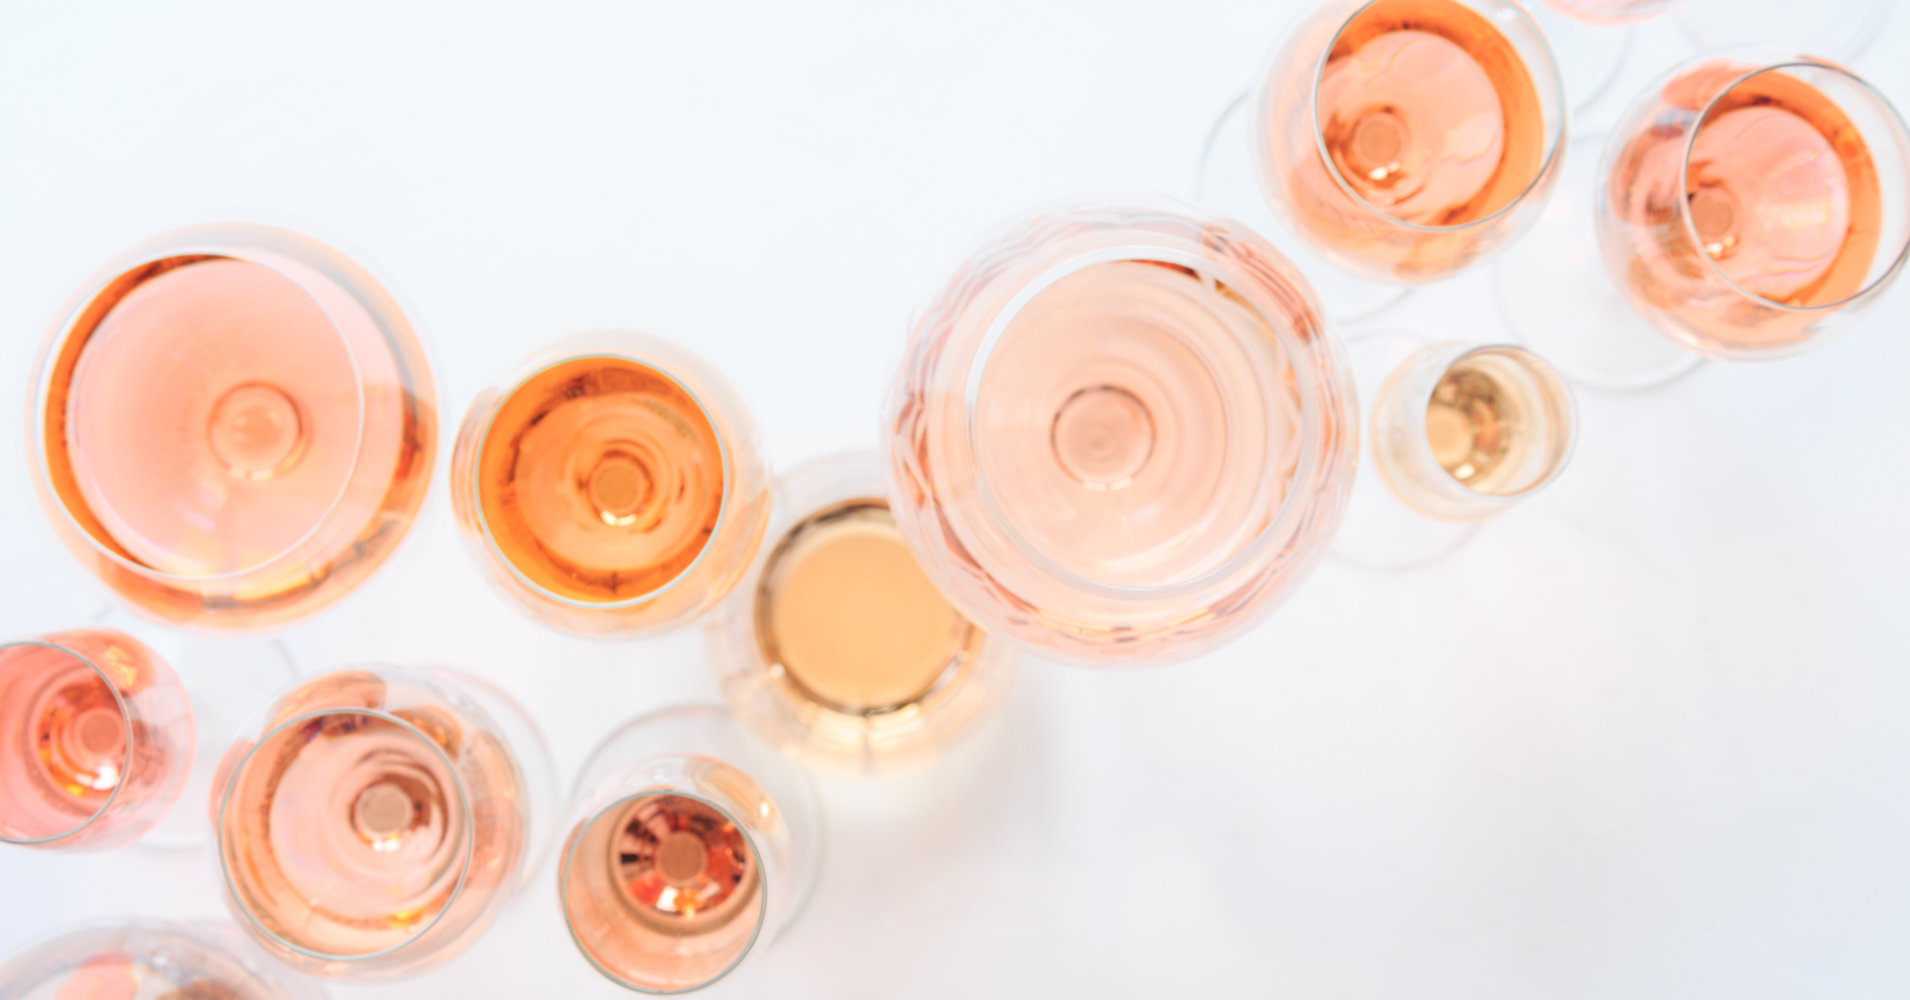 Is Your Rosé Fooling You With Its Pretty Bottle Design? photo